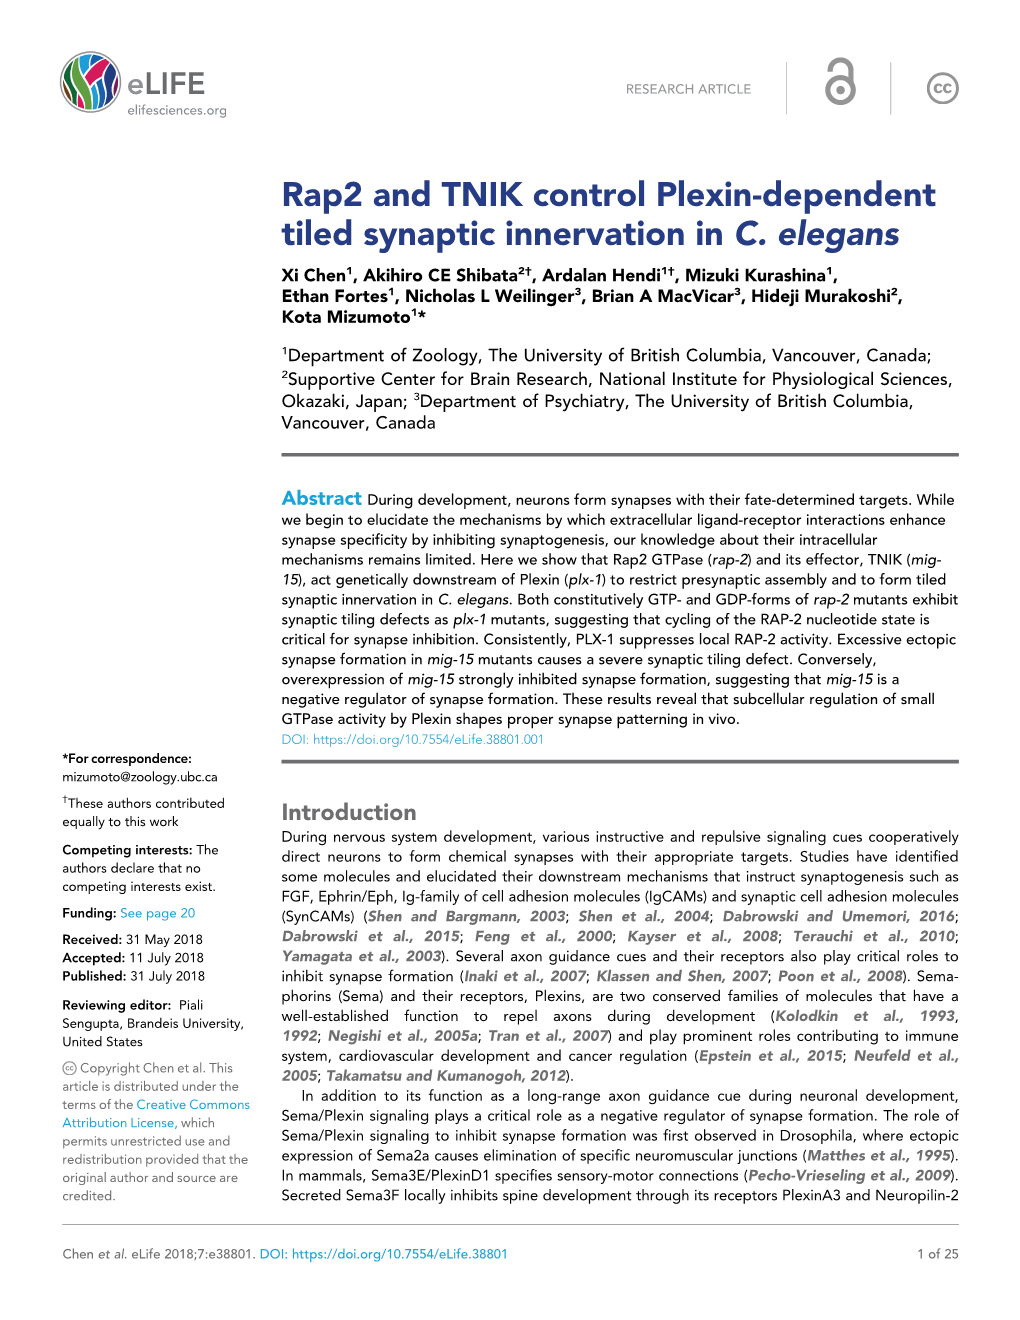 Rap2 and TNIK Control Plexin-Dependent Tiled Synaptic Innervation in C